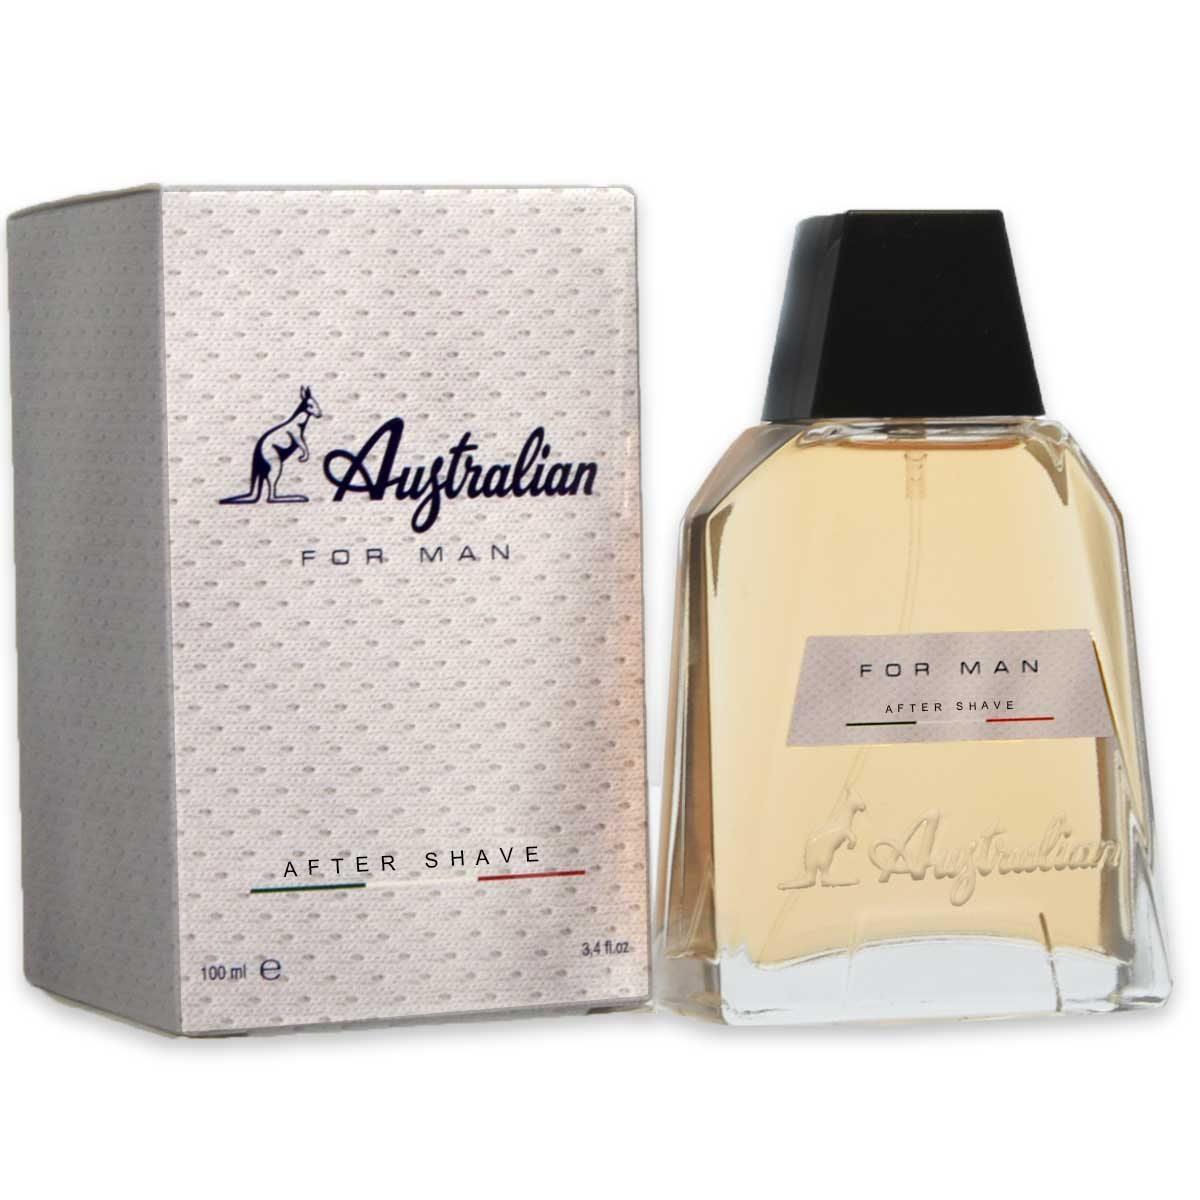 Australian bianco after shave 100 ml